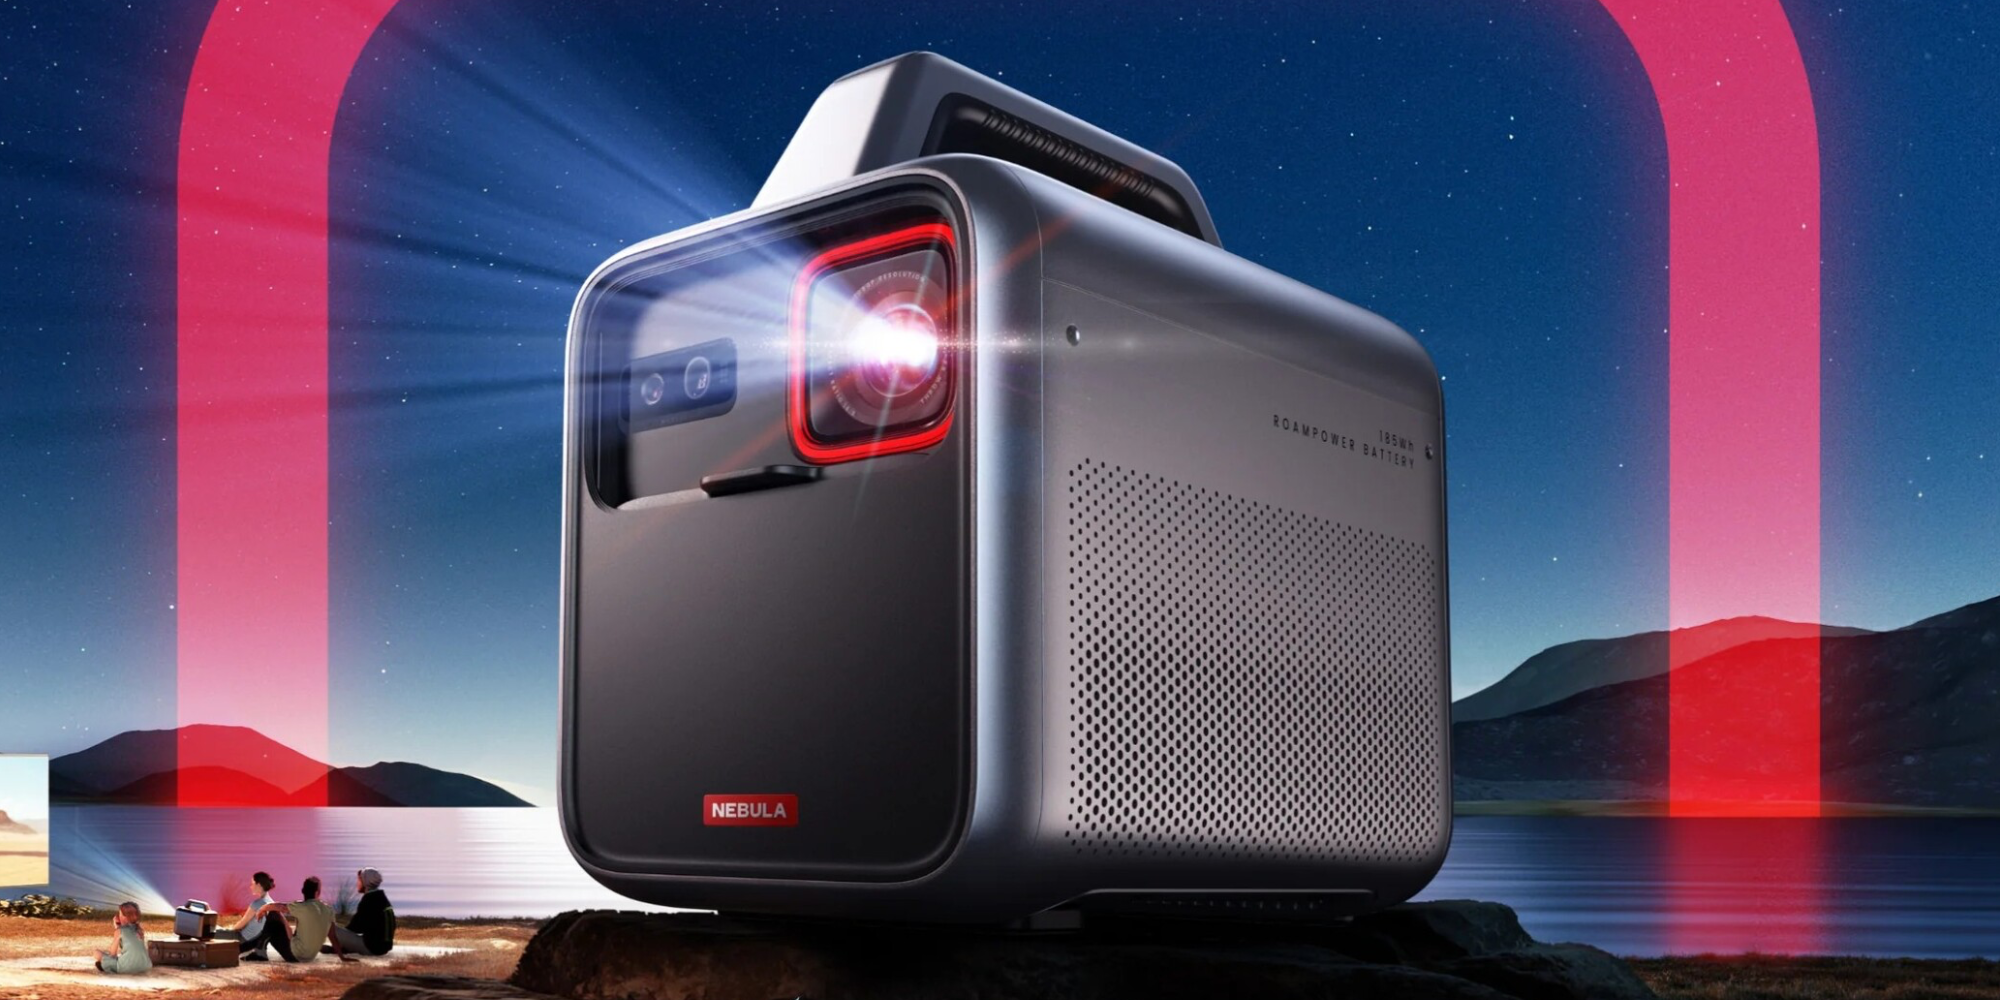 Anker's Nebula Mars 3 Air GTV projector with 4K resolution and